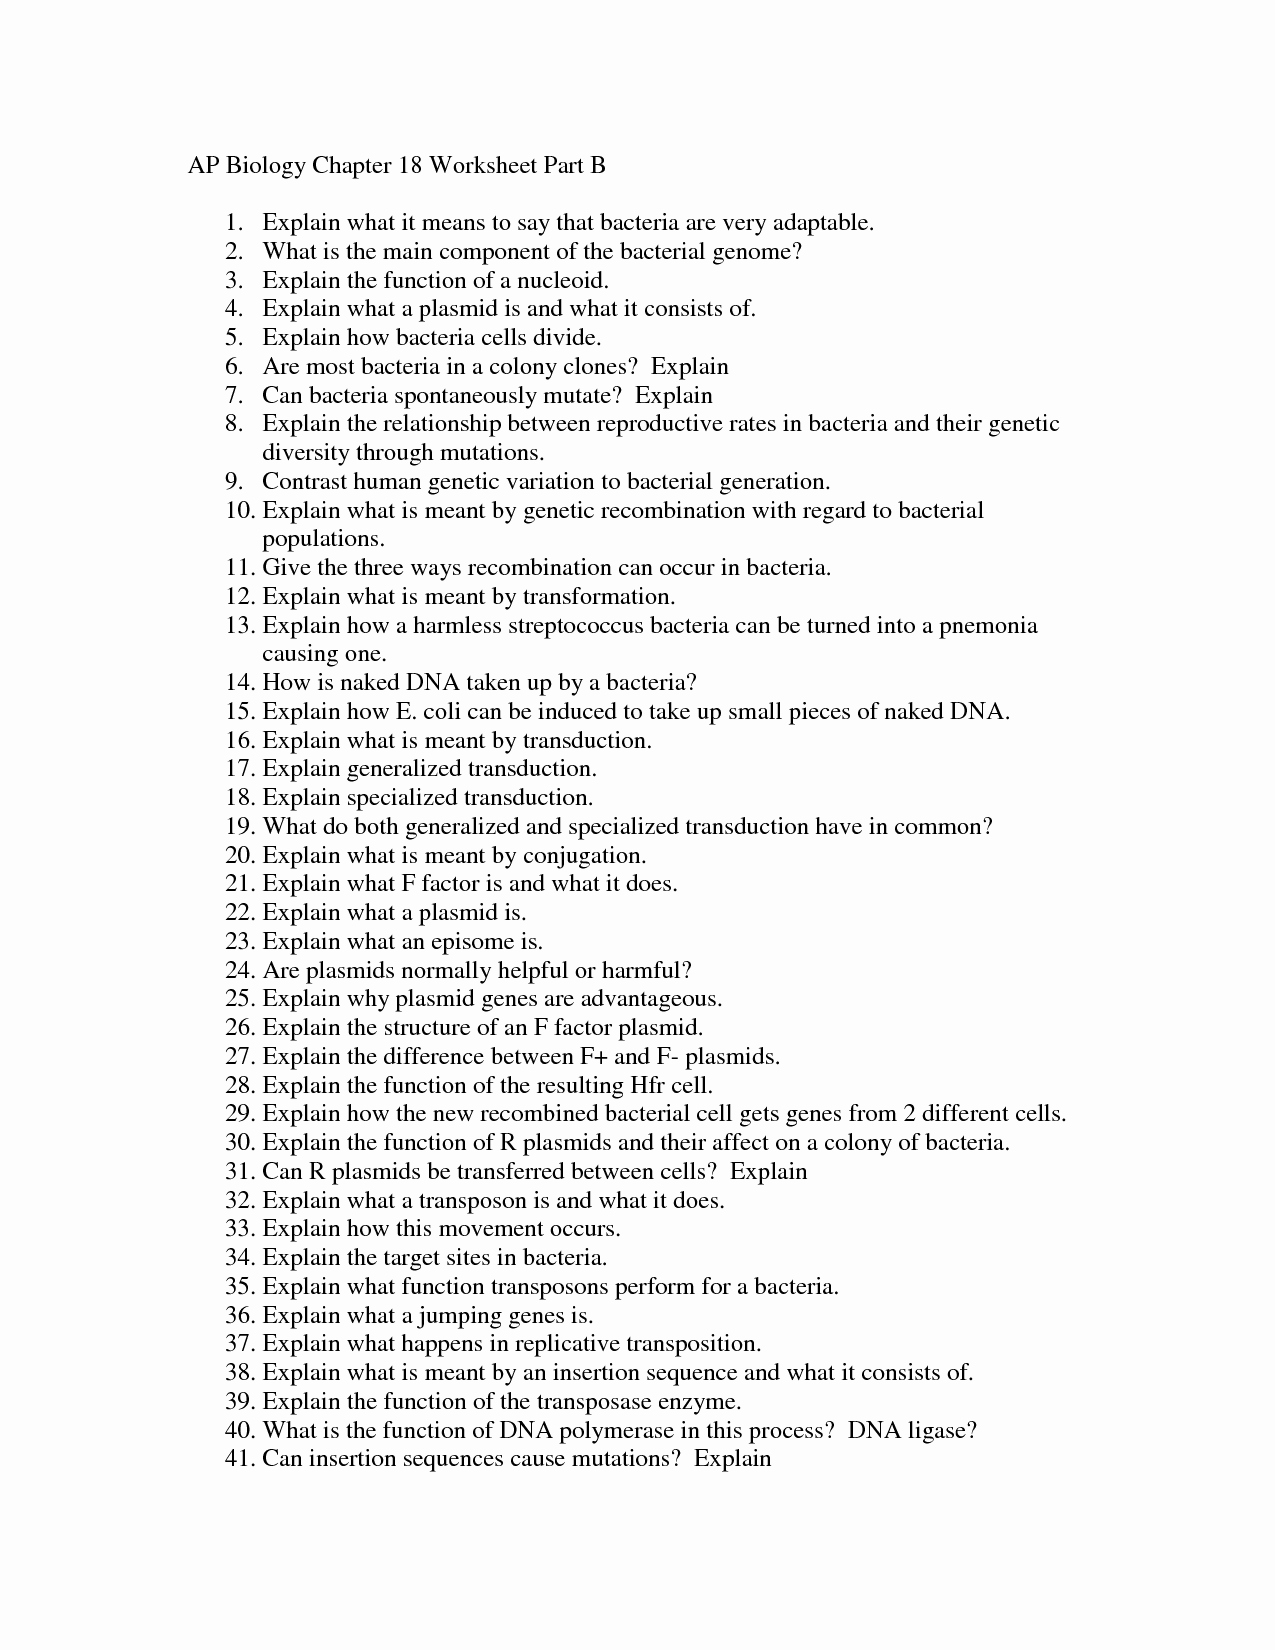 Dna Replication Worksheet Answers Inspirational 19 Best Of Dna Replication Structure Worksheet and